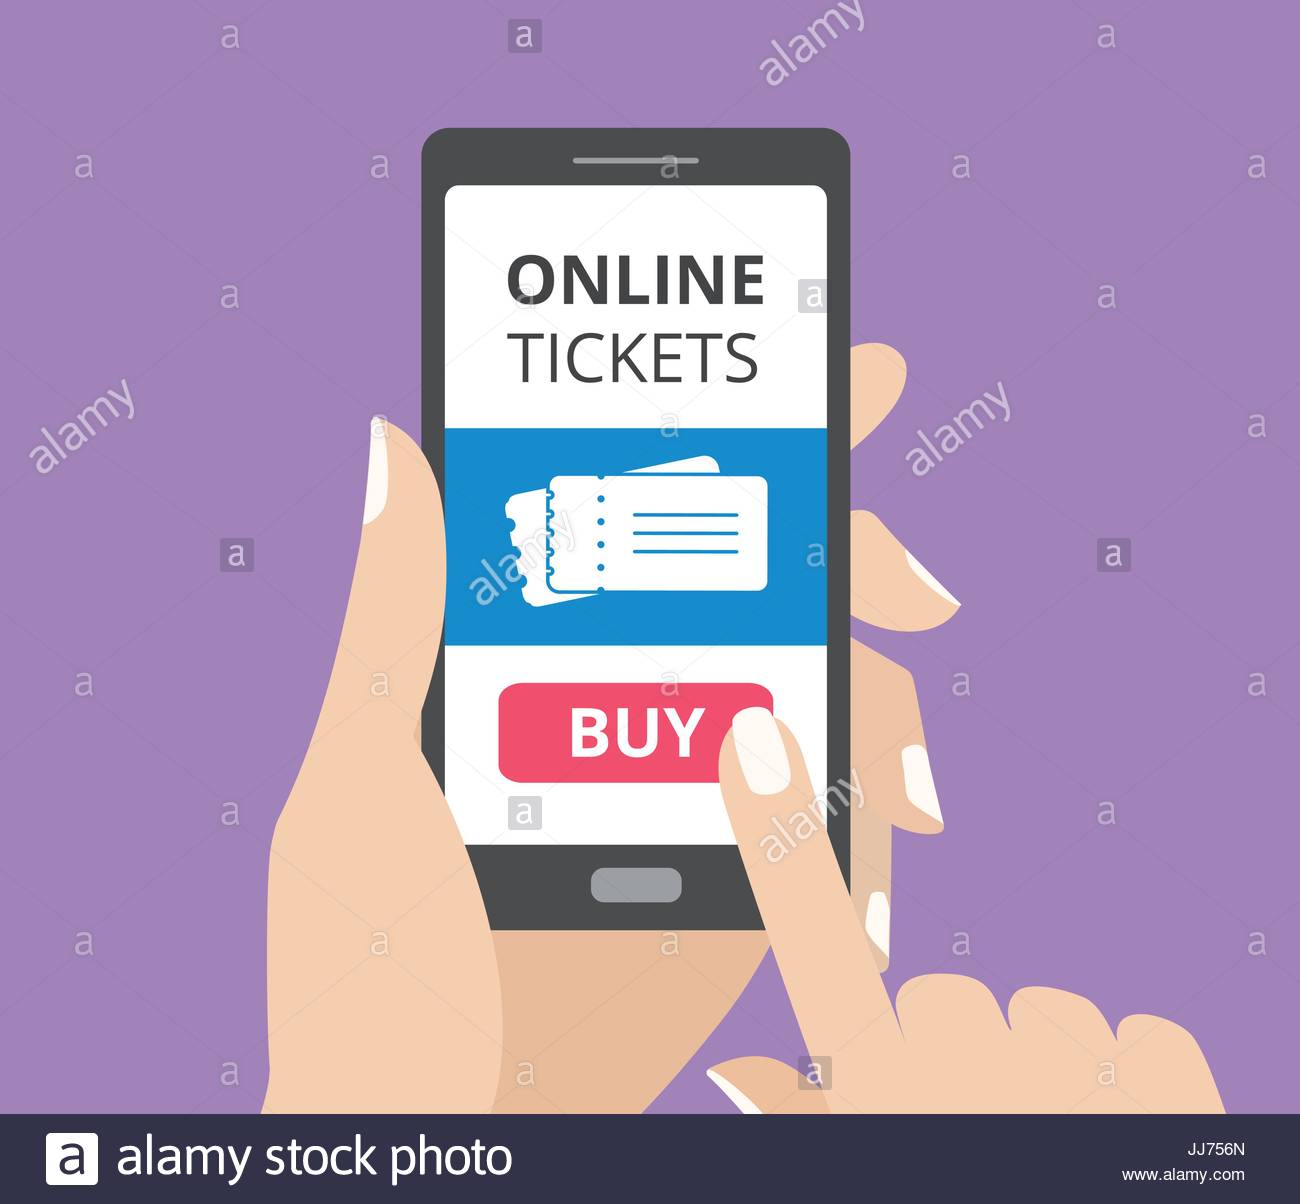 Admission, admit, book, buy, entry, order, ticket booking icon 